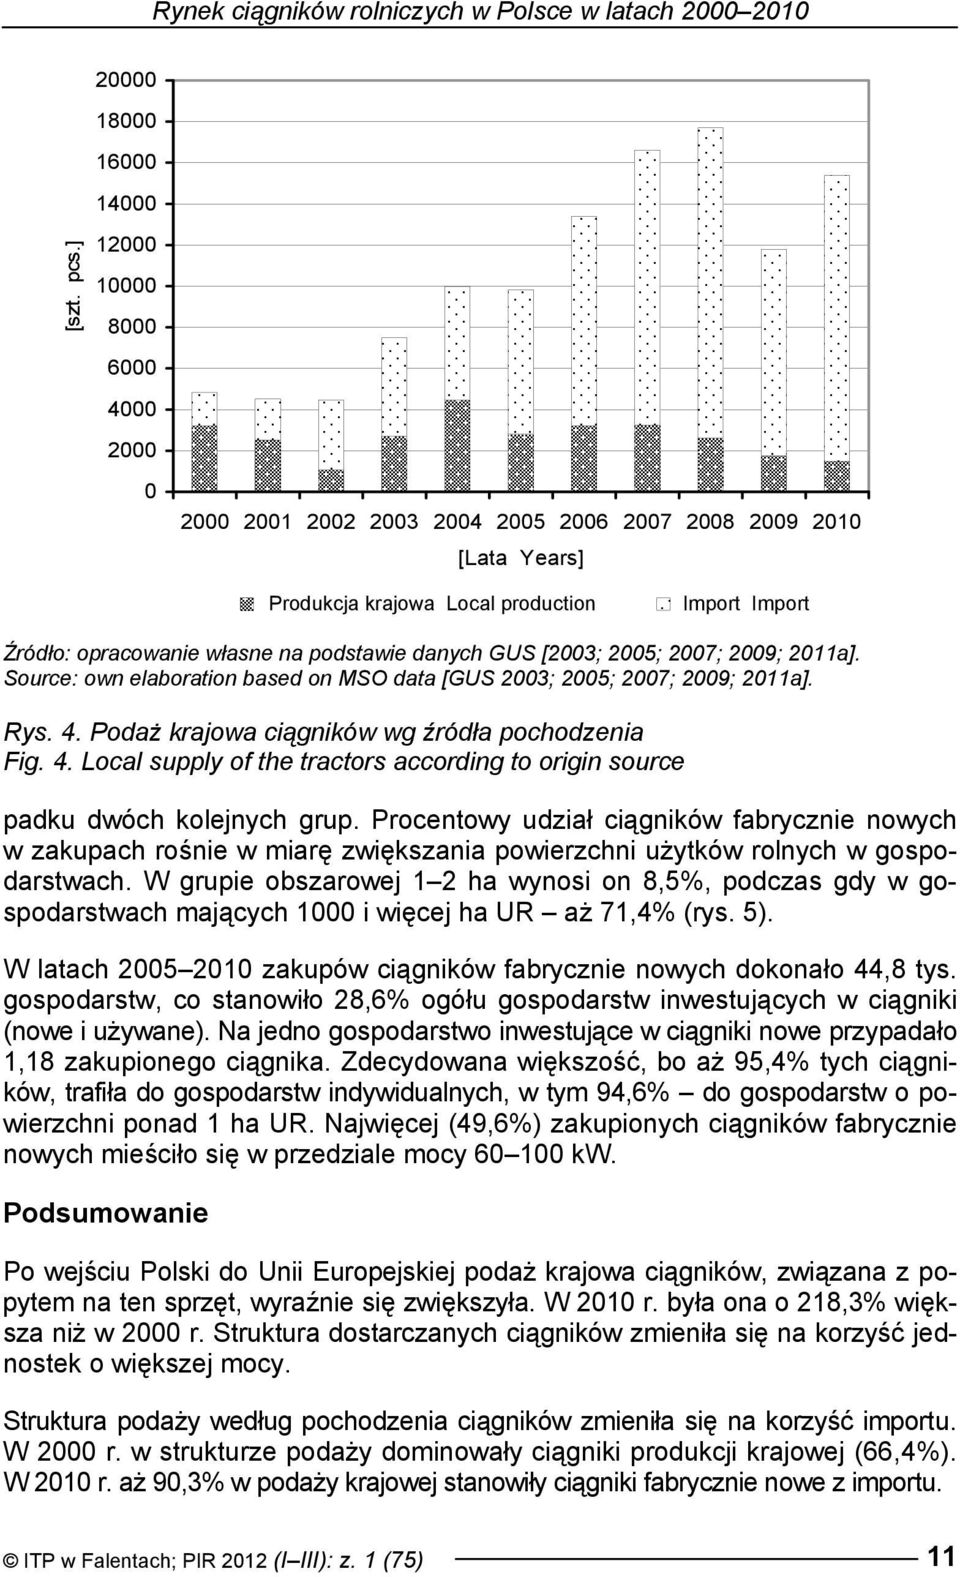 GUS [2003; 2005; 2007; 2009; 2011a]. Source: own elaboration based on MSO data [GUS 2003; 2005; 2007; 2009; 2011a]. Rys. 4.